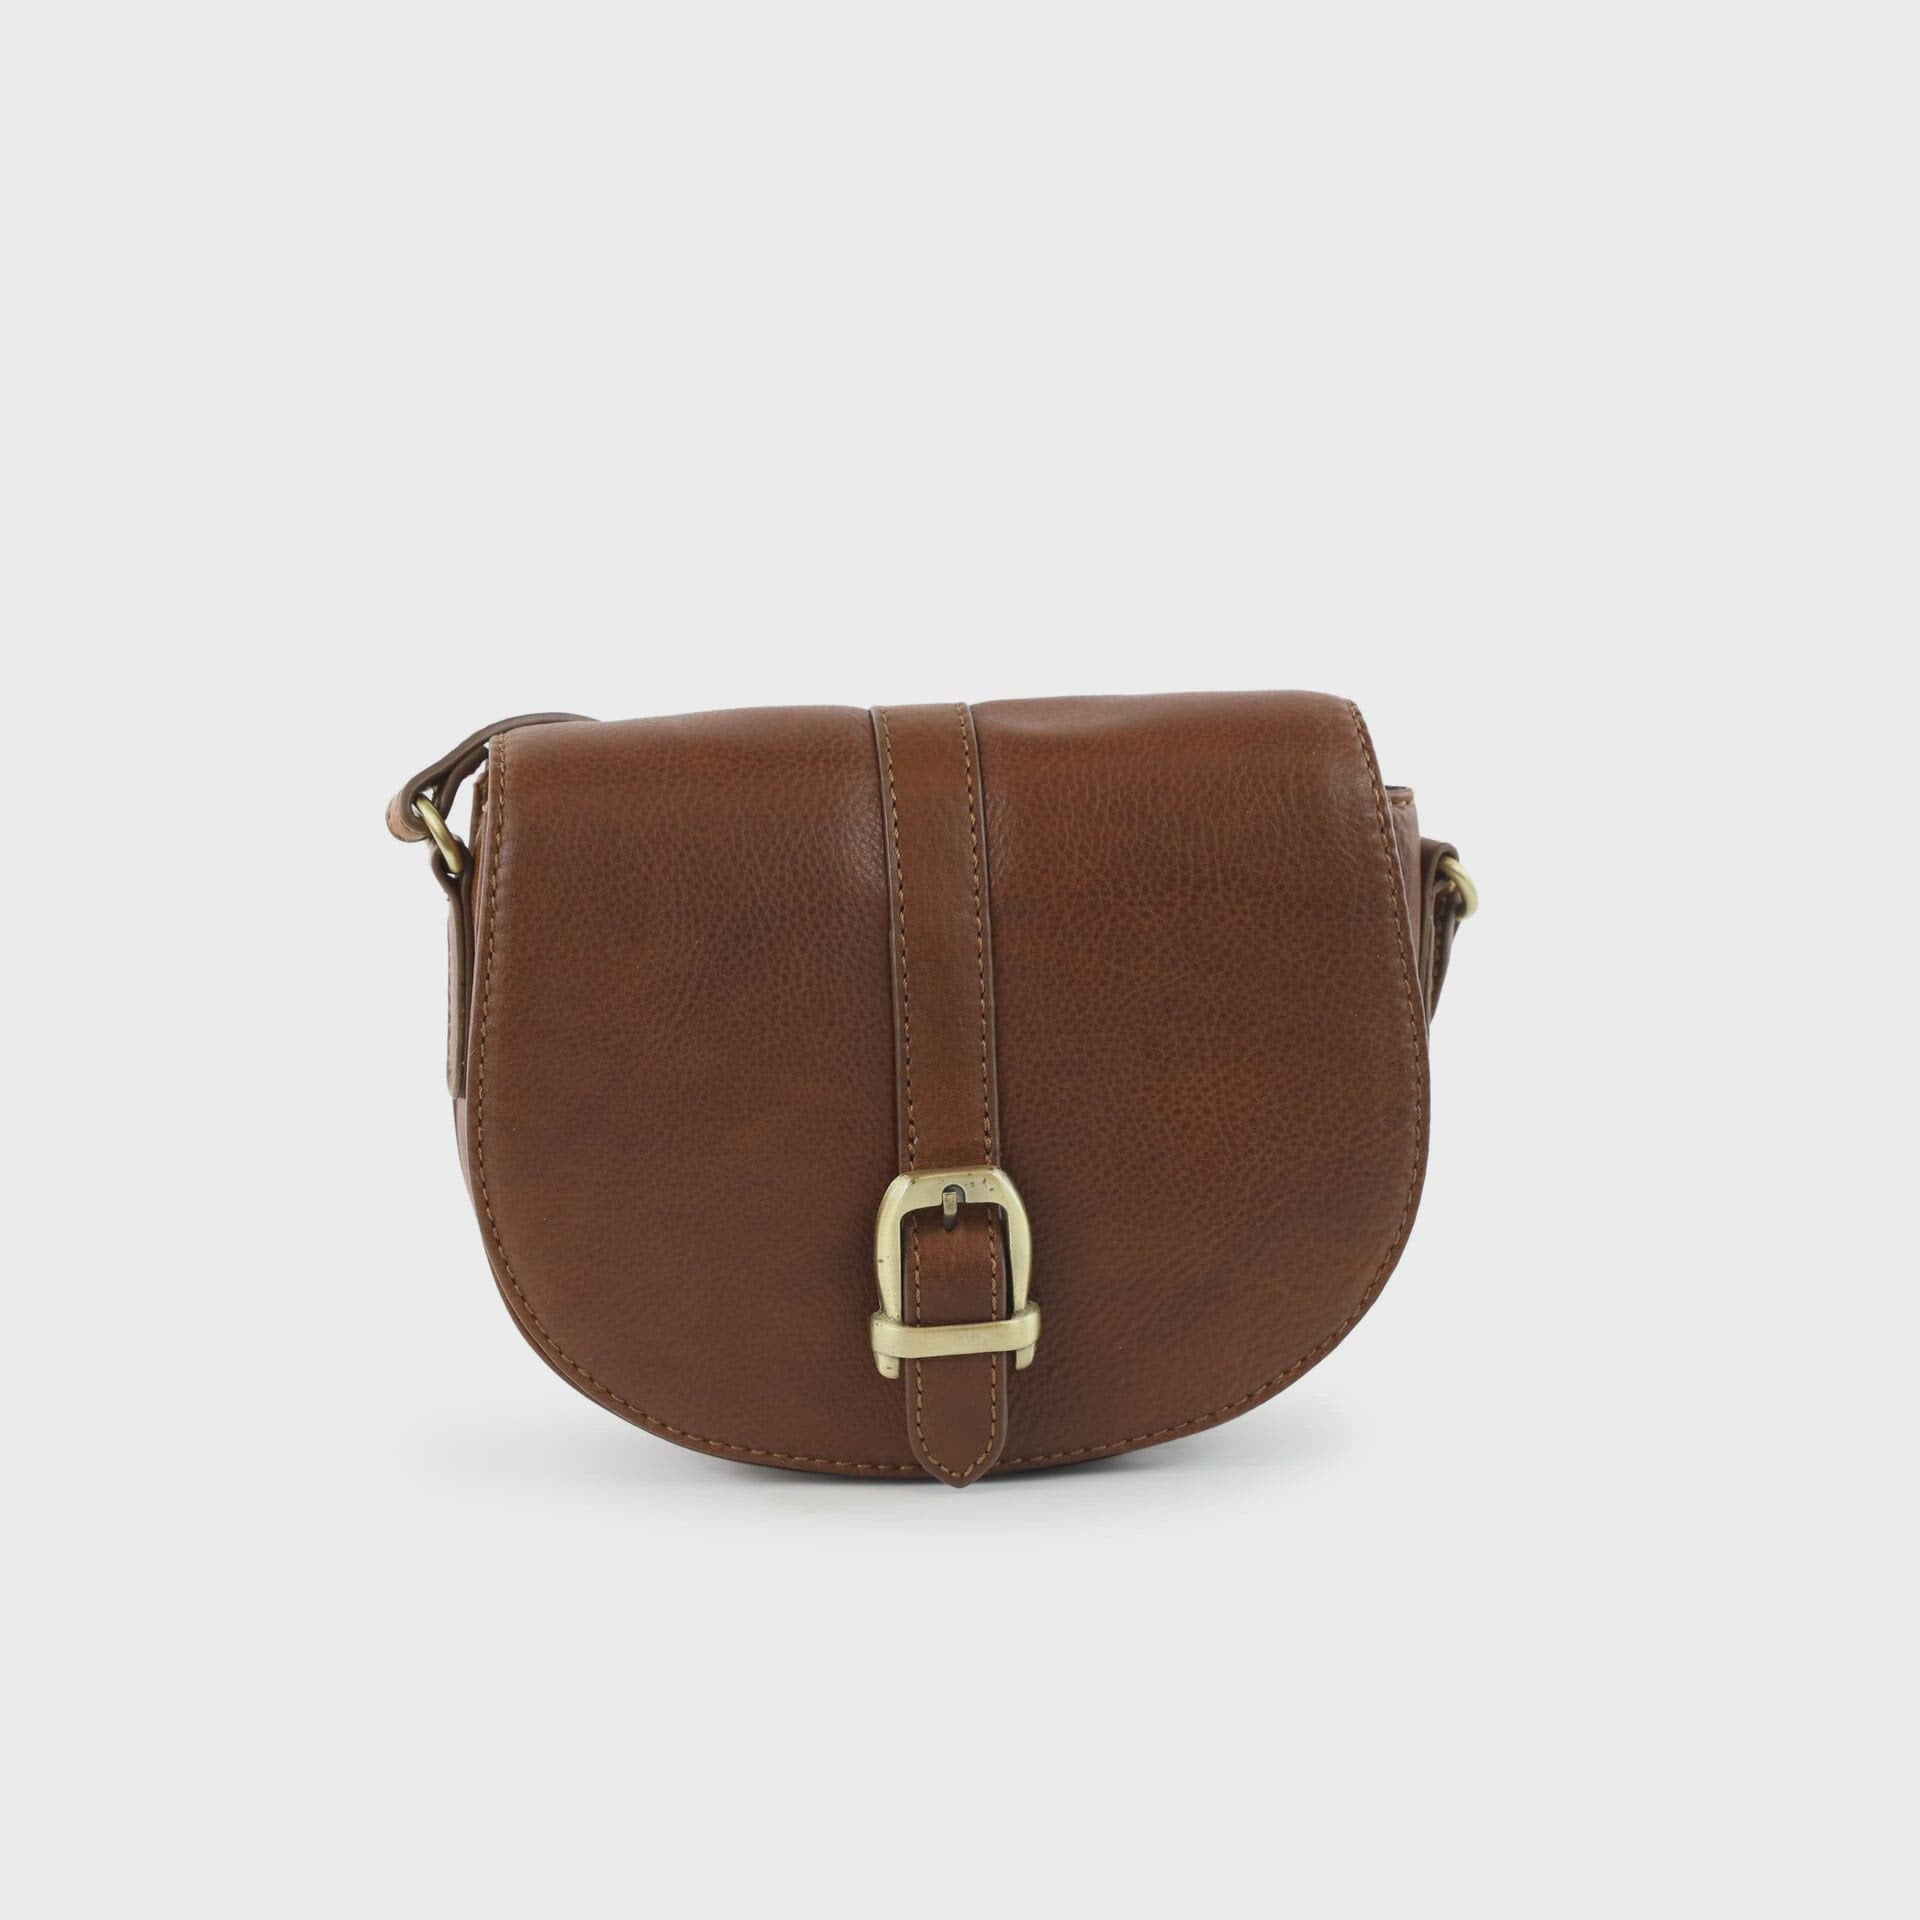 Barbour Laire Ladies Leather Saddle Bag - Brown